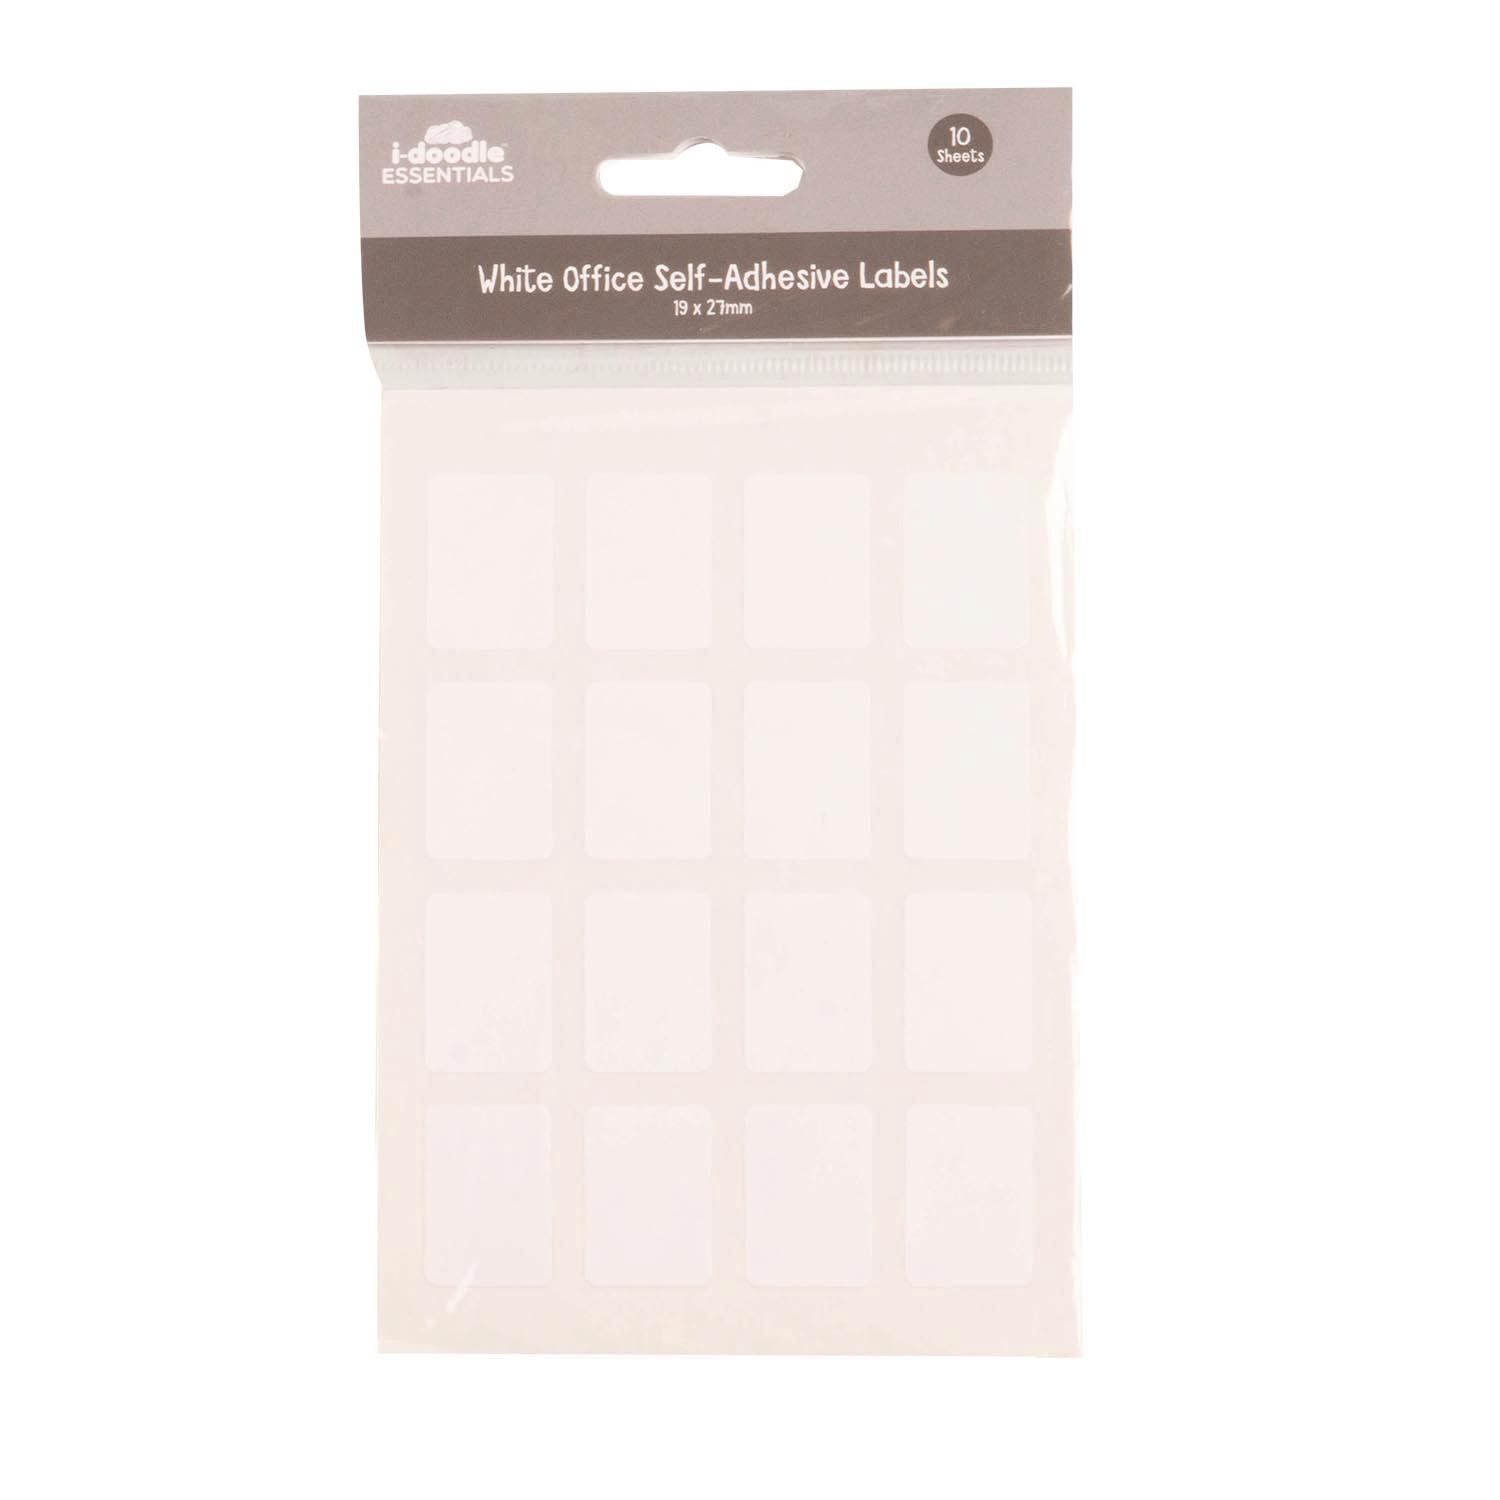 White Adhesive Home and Office Labels - 10 Image